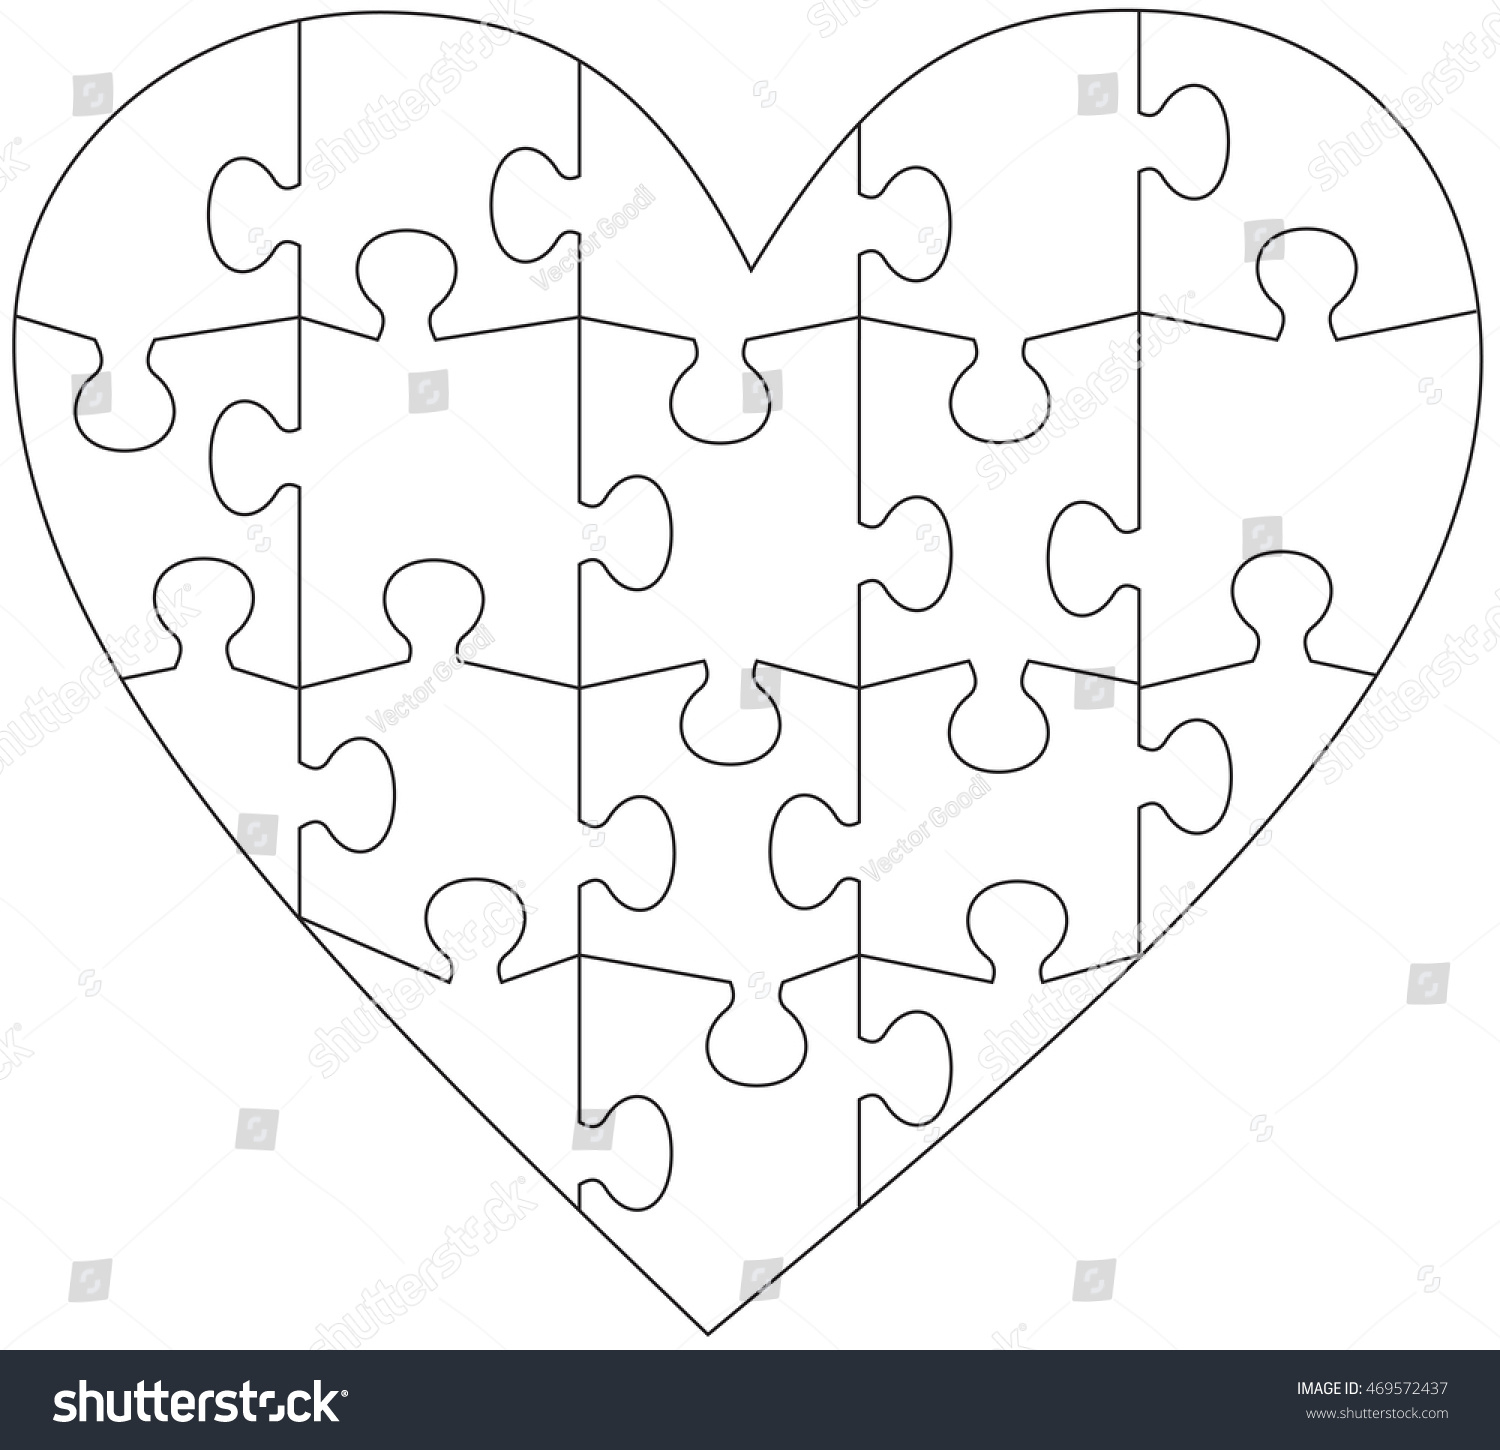 26 Images Of Compound Word Puzzle Heart Template | Unemeuf - Printable Heart Puzzles